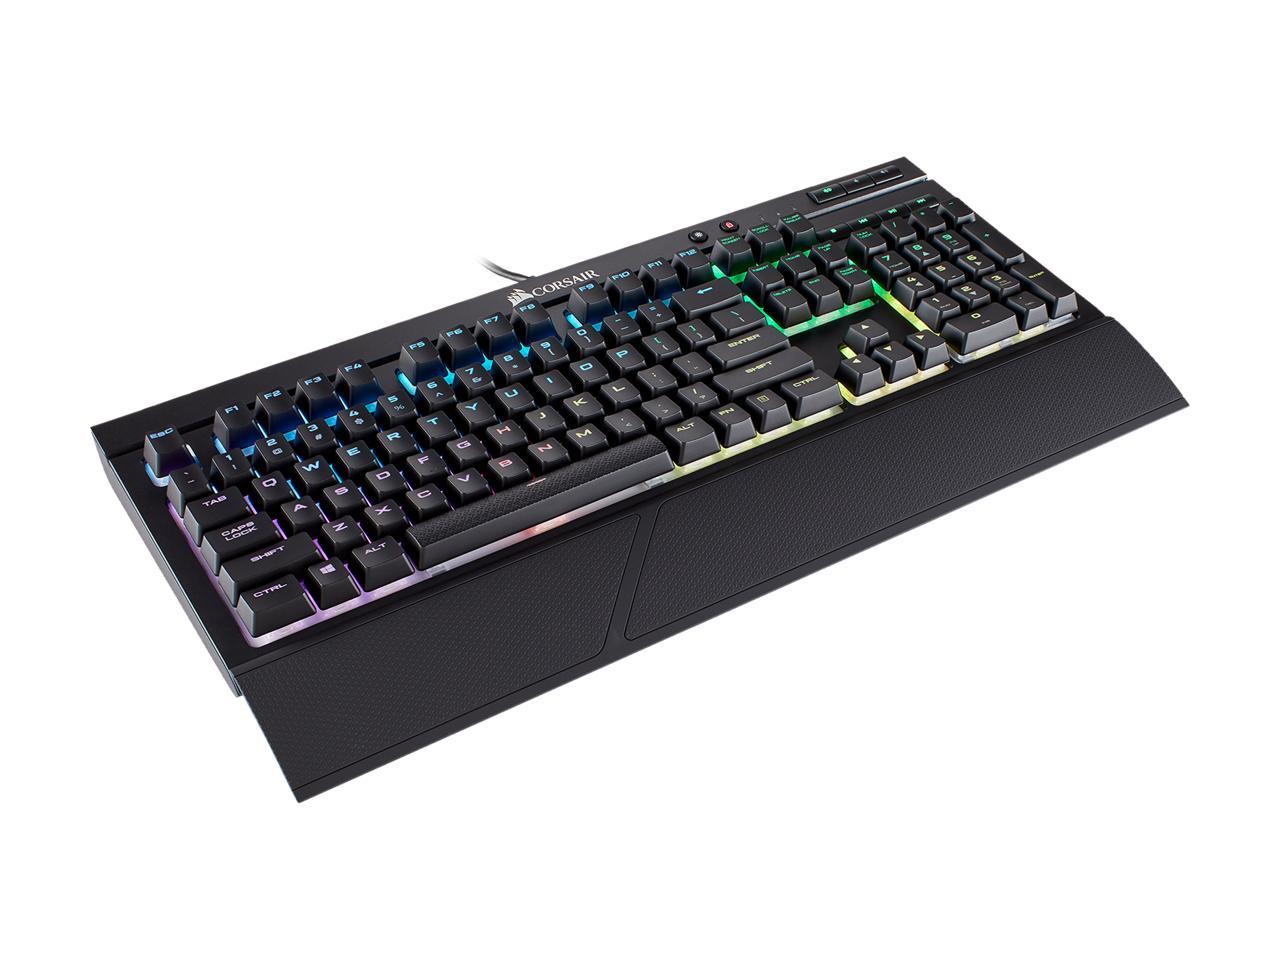 CORSAIR K68 RGB Mechanical Gaming Keyboard, Backlit RGB LED, Cherry MX Red,  Dust and Spill Resistant